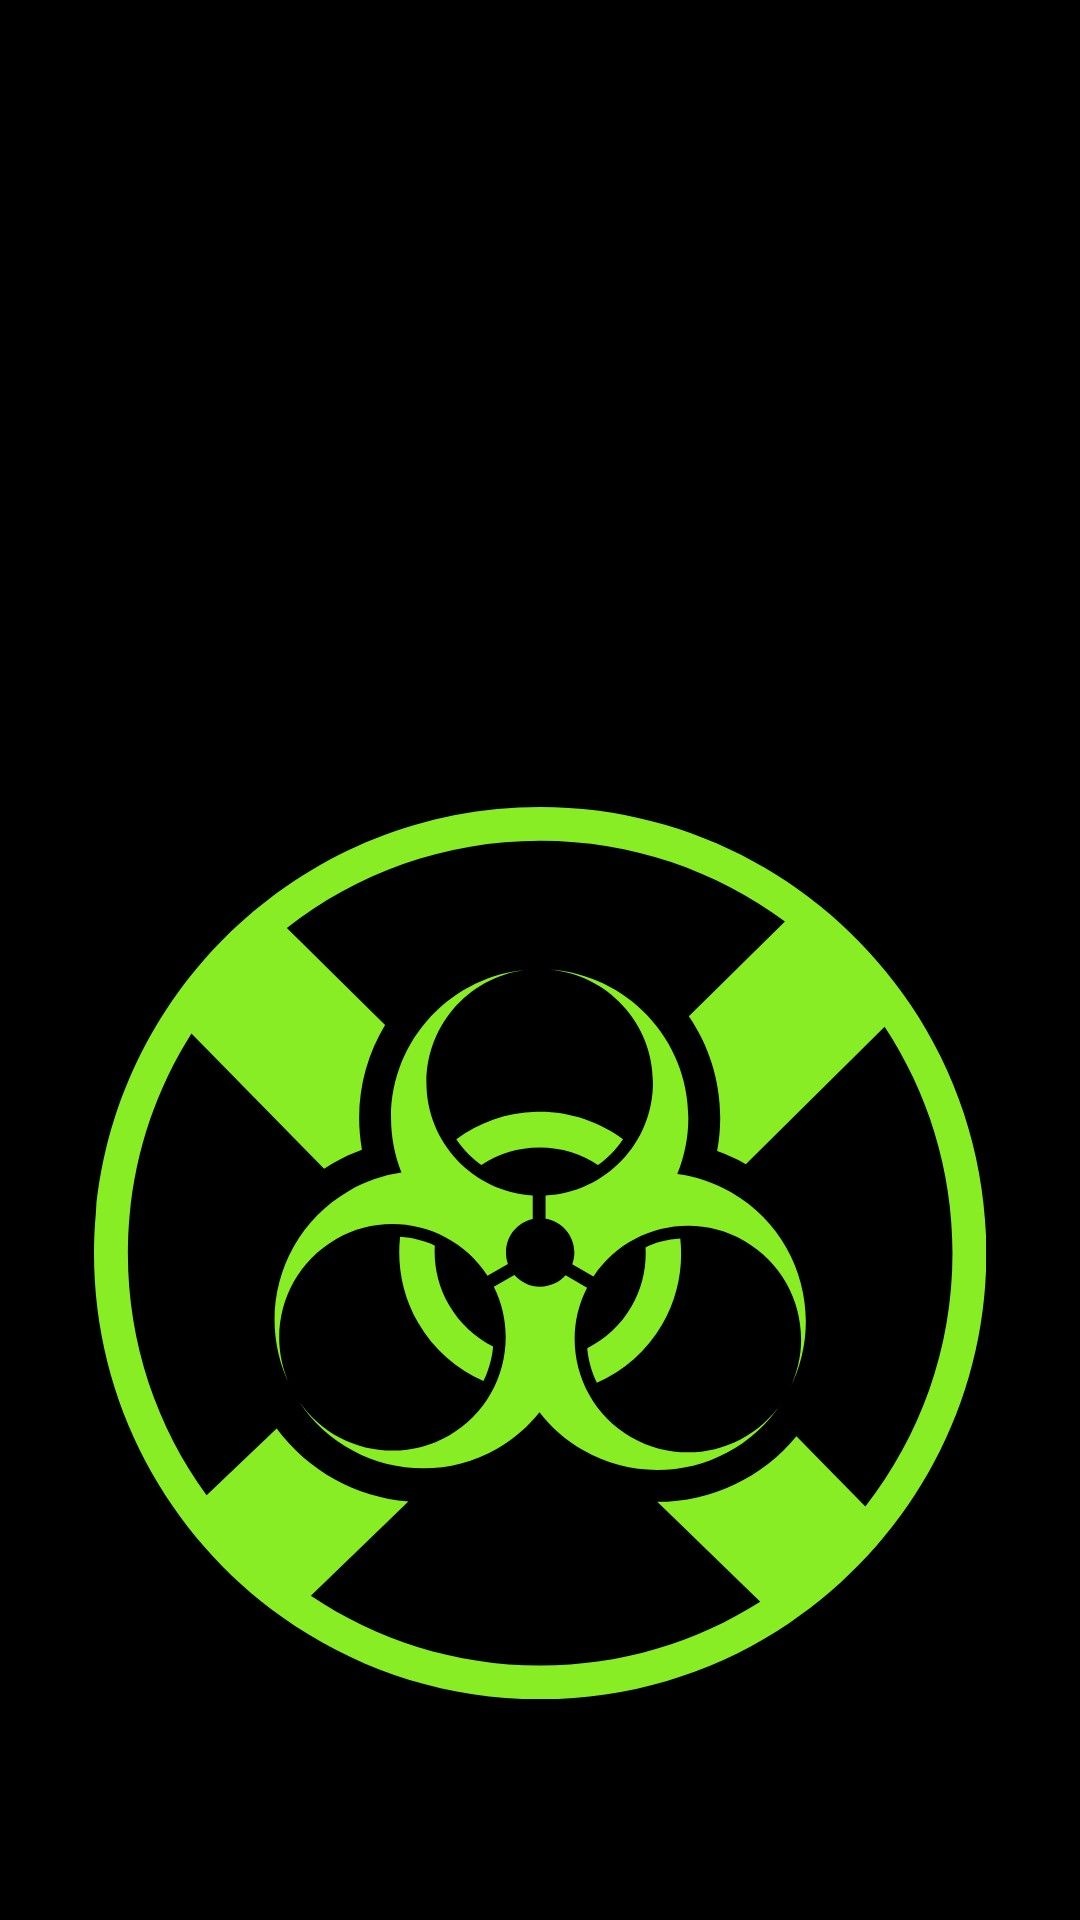 Green Biohazard: A recognizable symbol designed to warn about hazardous or dangerous materials, locations, or objects. 1080x1920 Full HD Background.